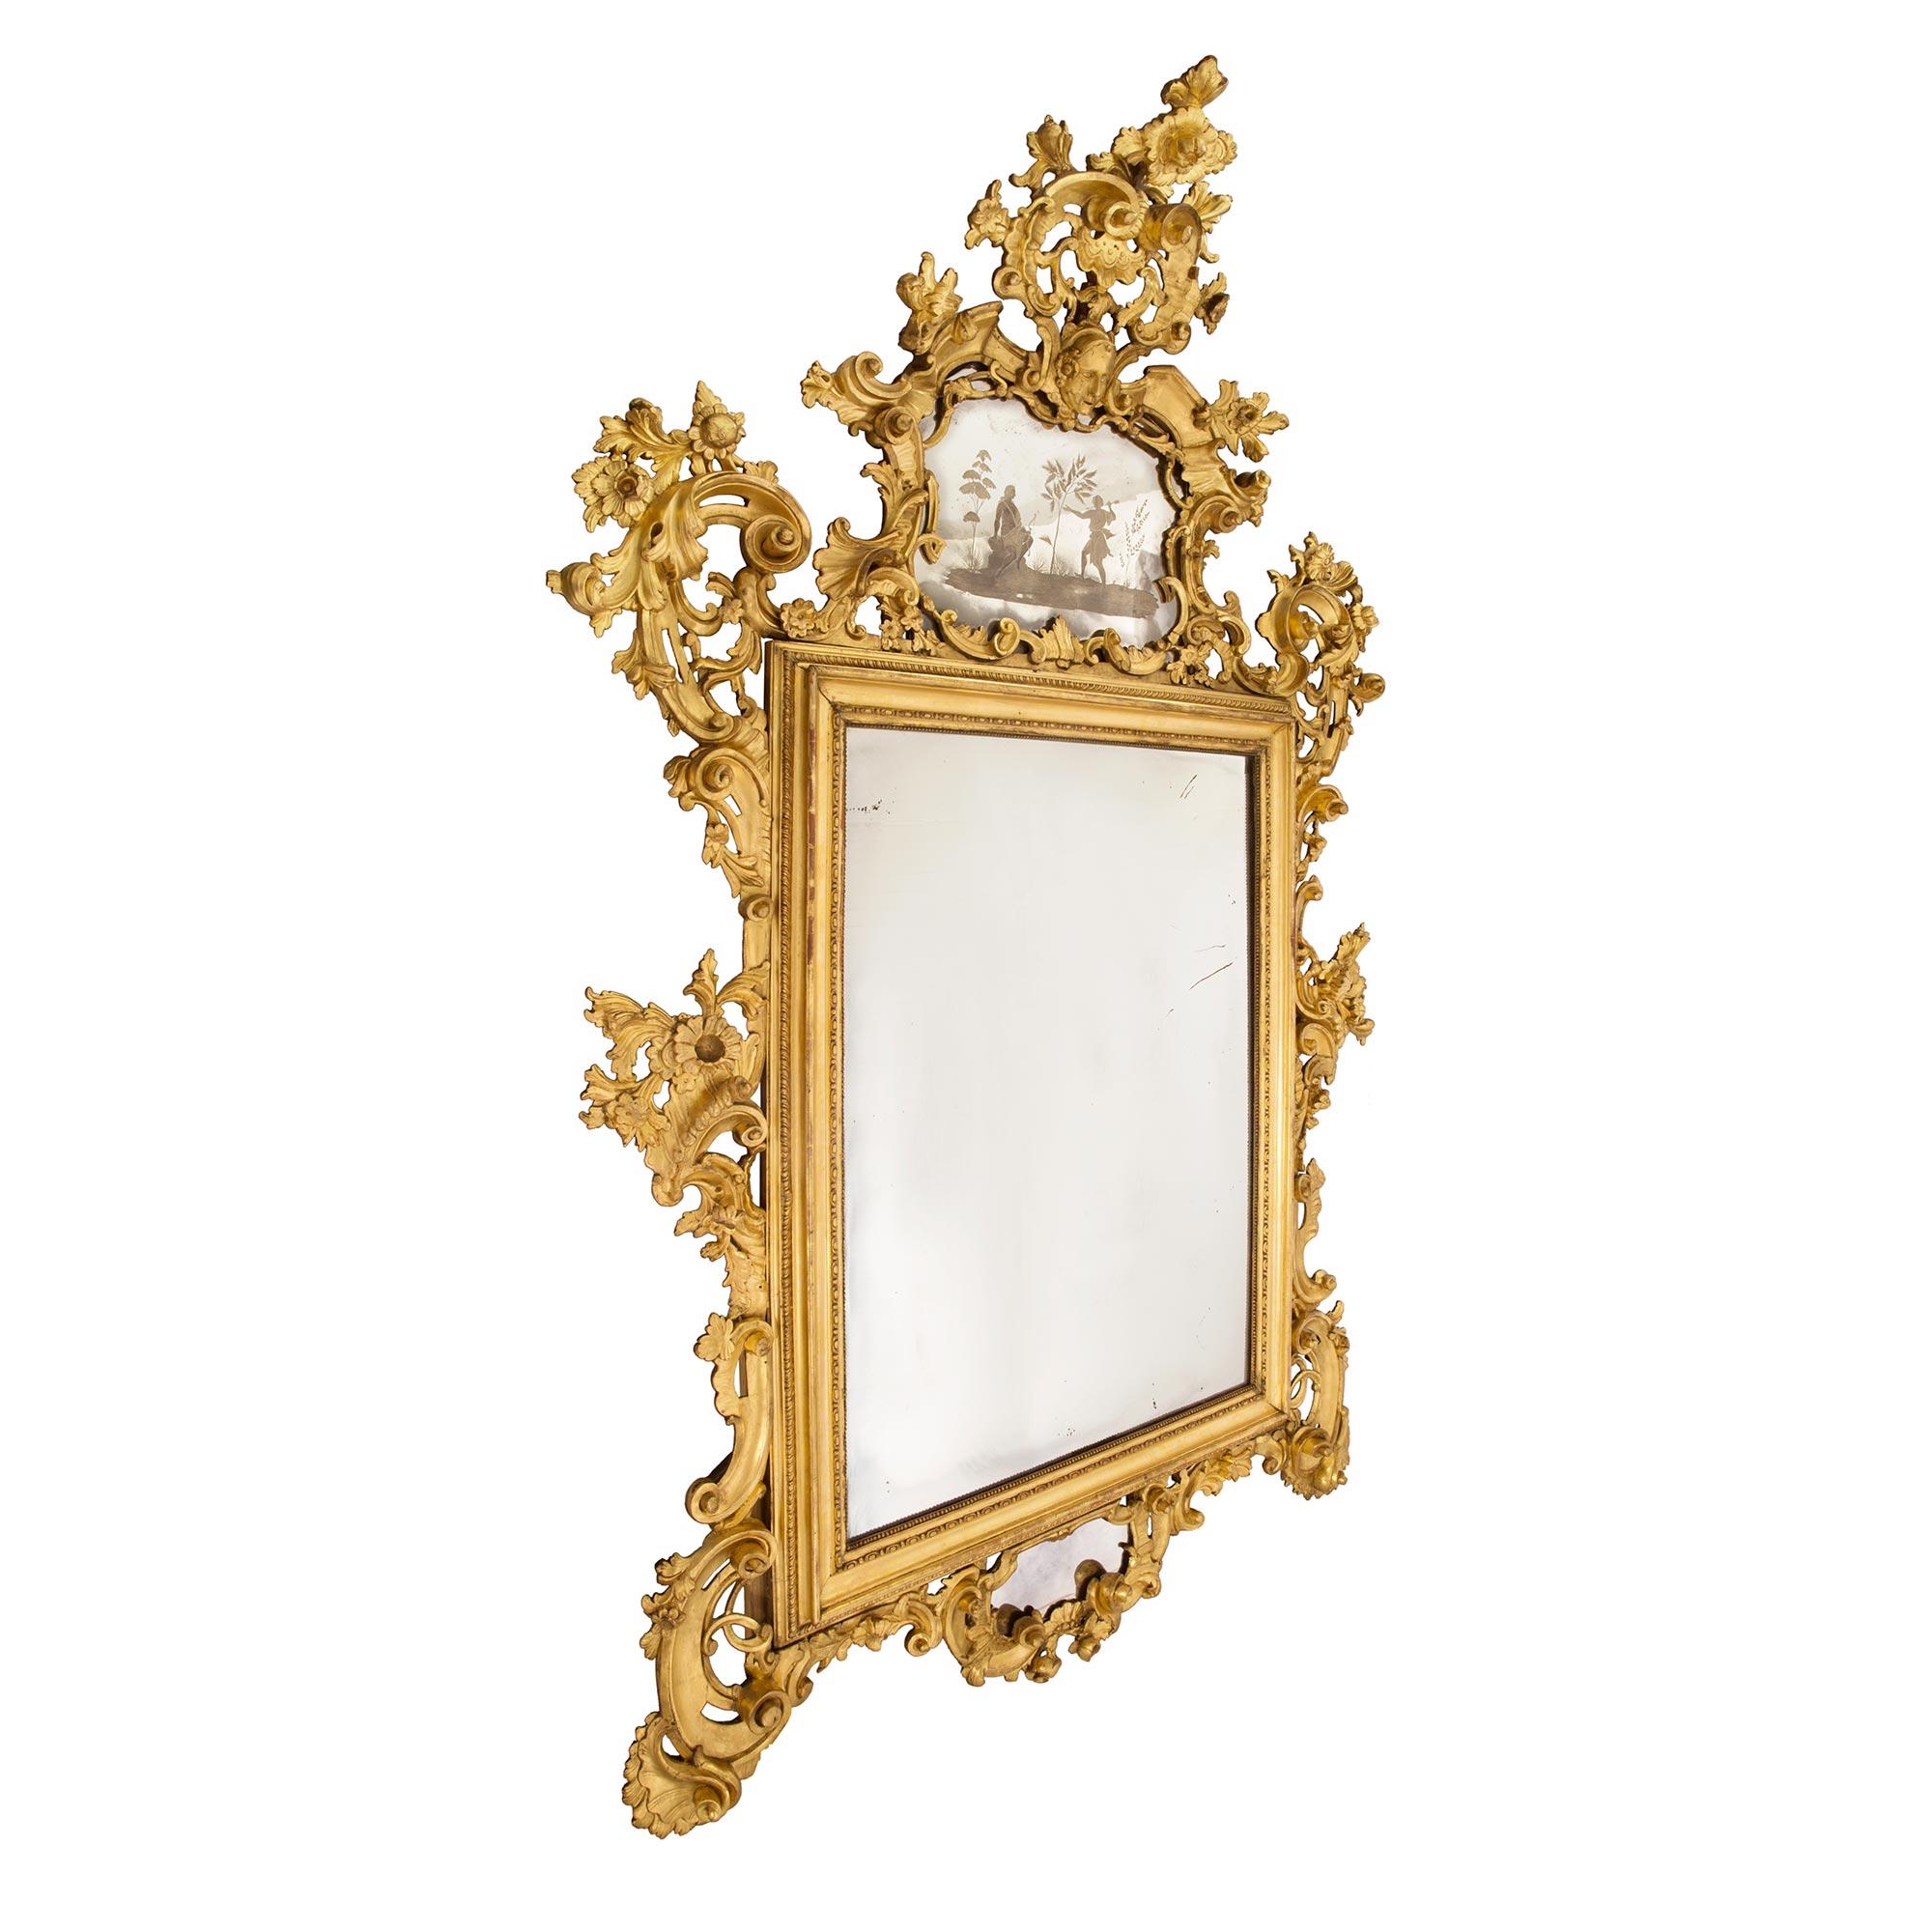 Italian 18th Century Giltwood Venetian Mirror In Good Condition For Sale In West Palm Beach, FL